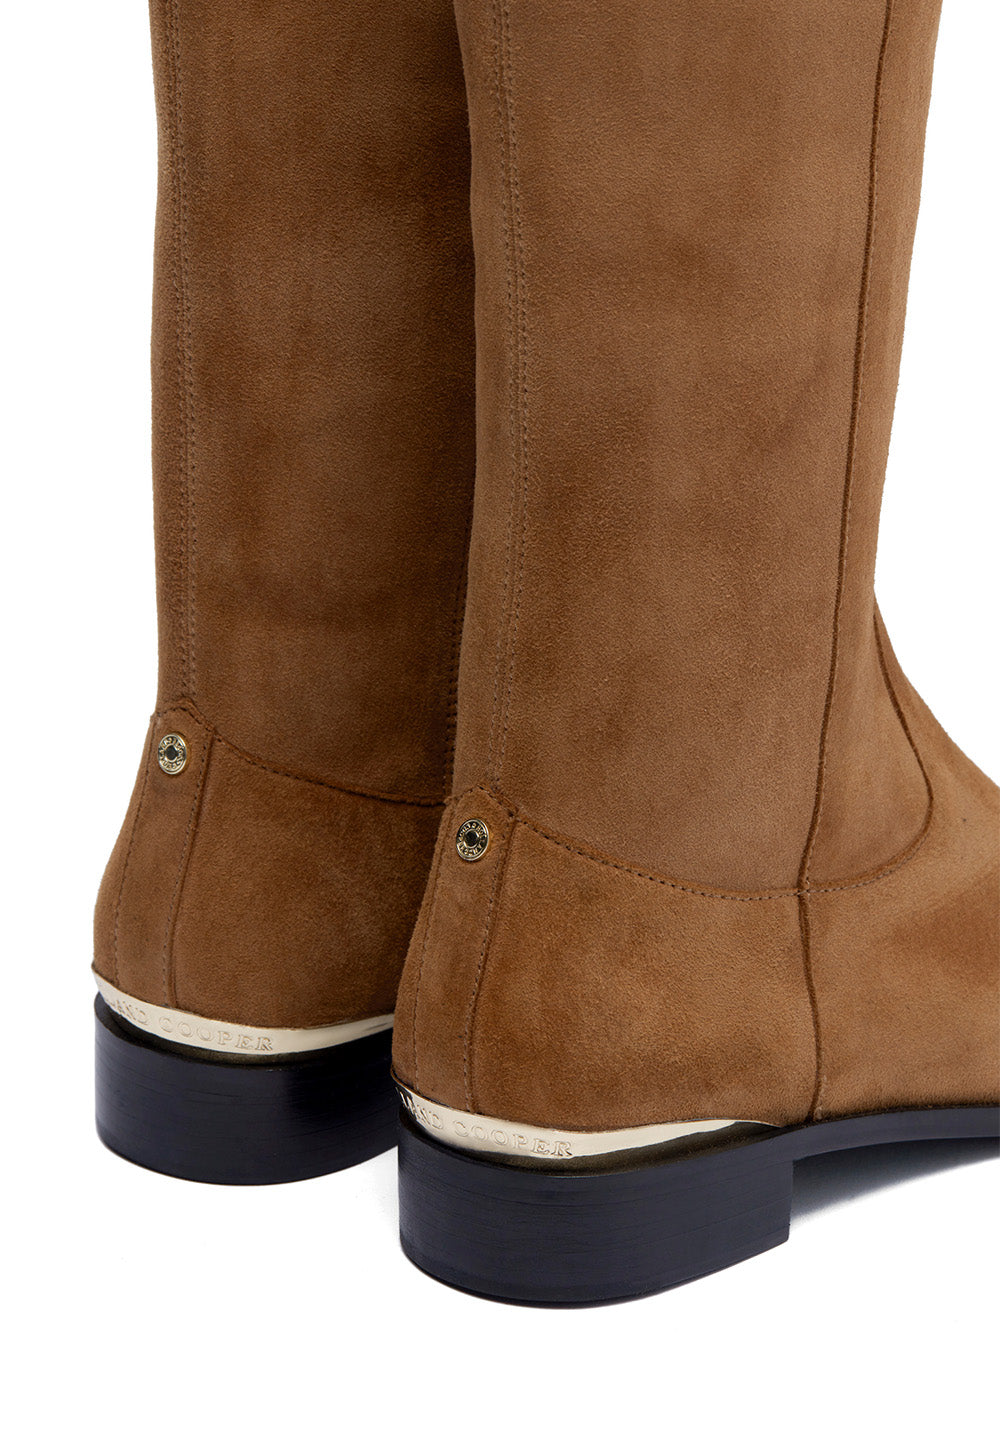 Albany Knee Boot - Tan Suede sold by Angel Divine